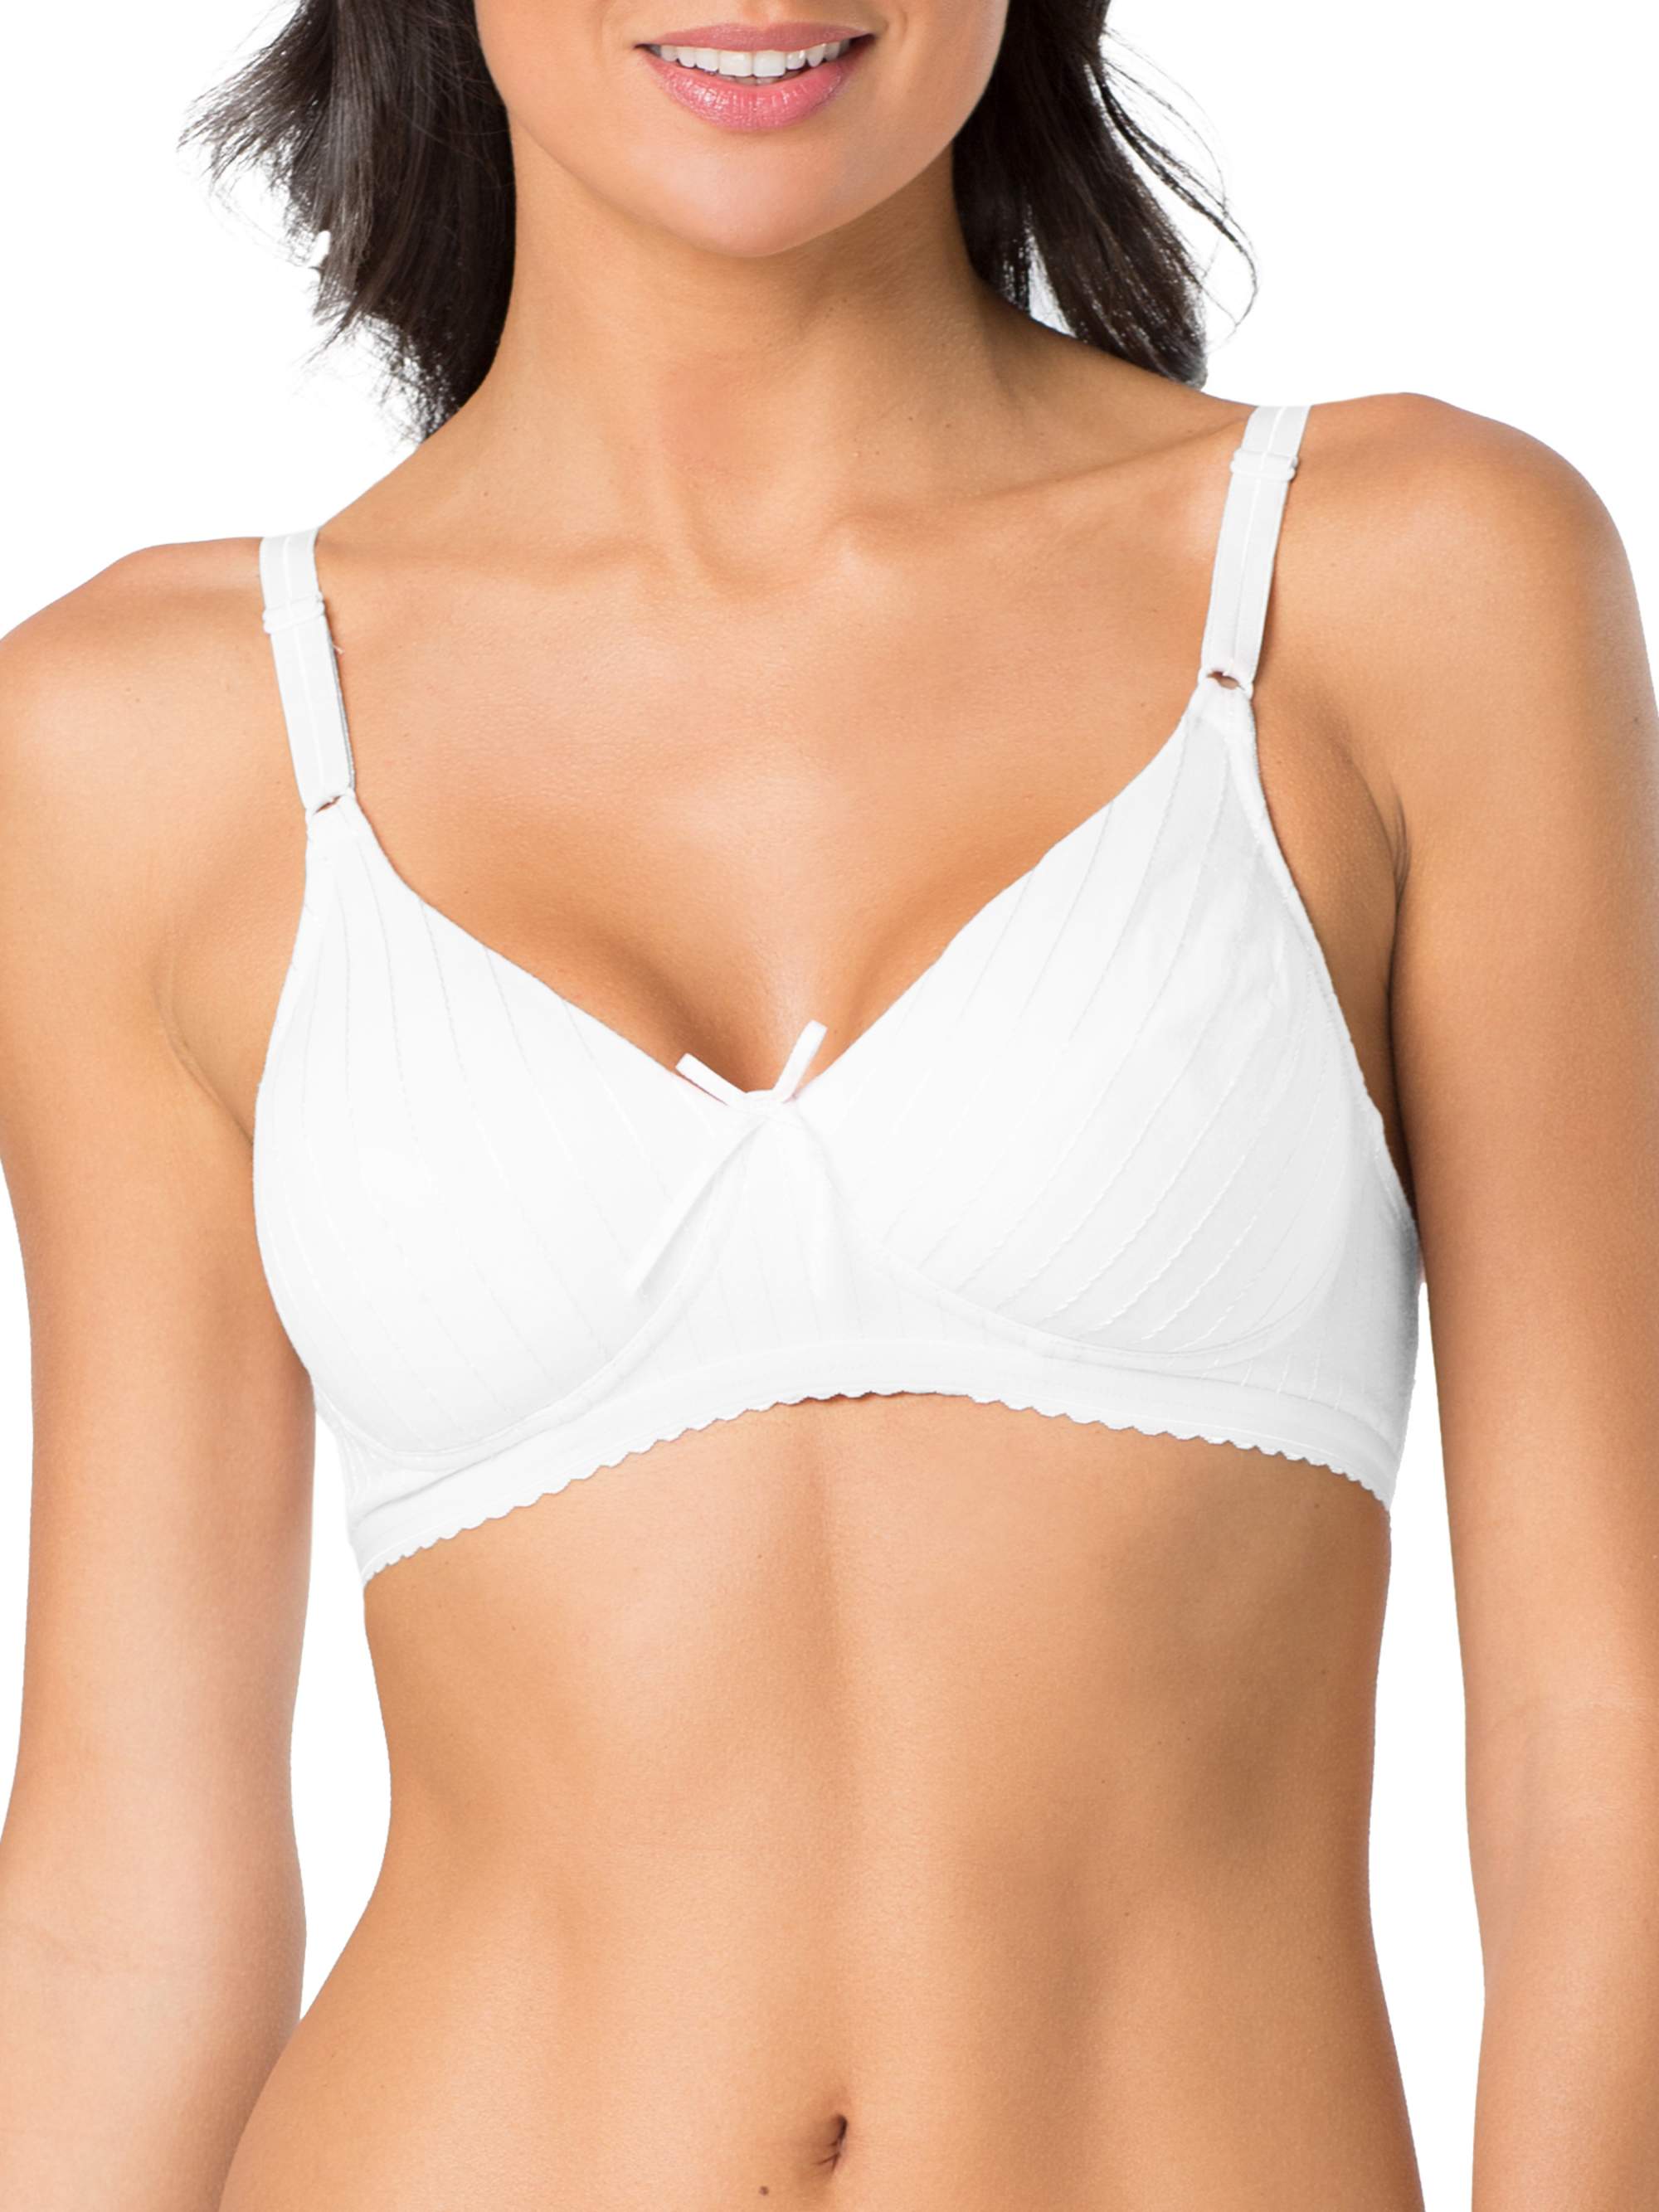 Womens Fleece Lined Wire-free Softcup Bra, Style 96248 - image 1 of 2